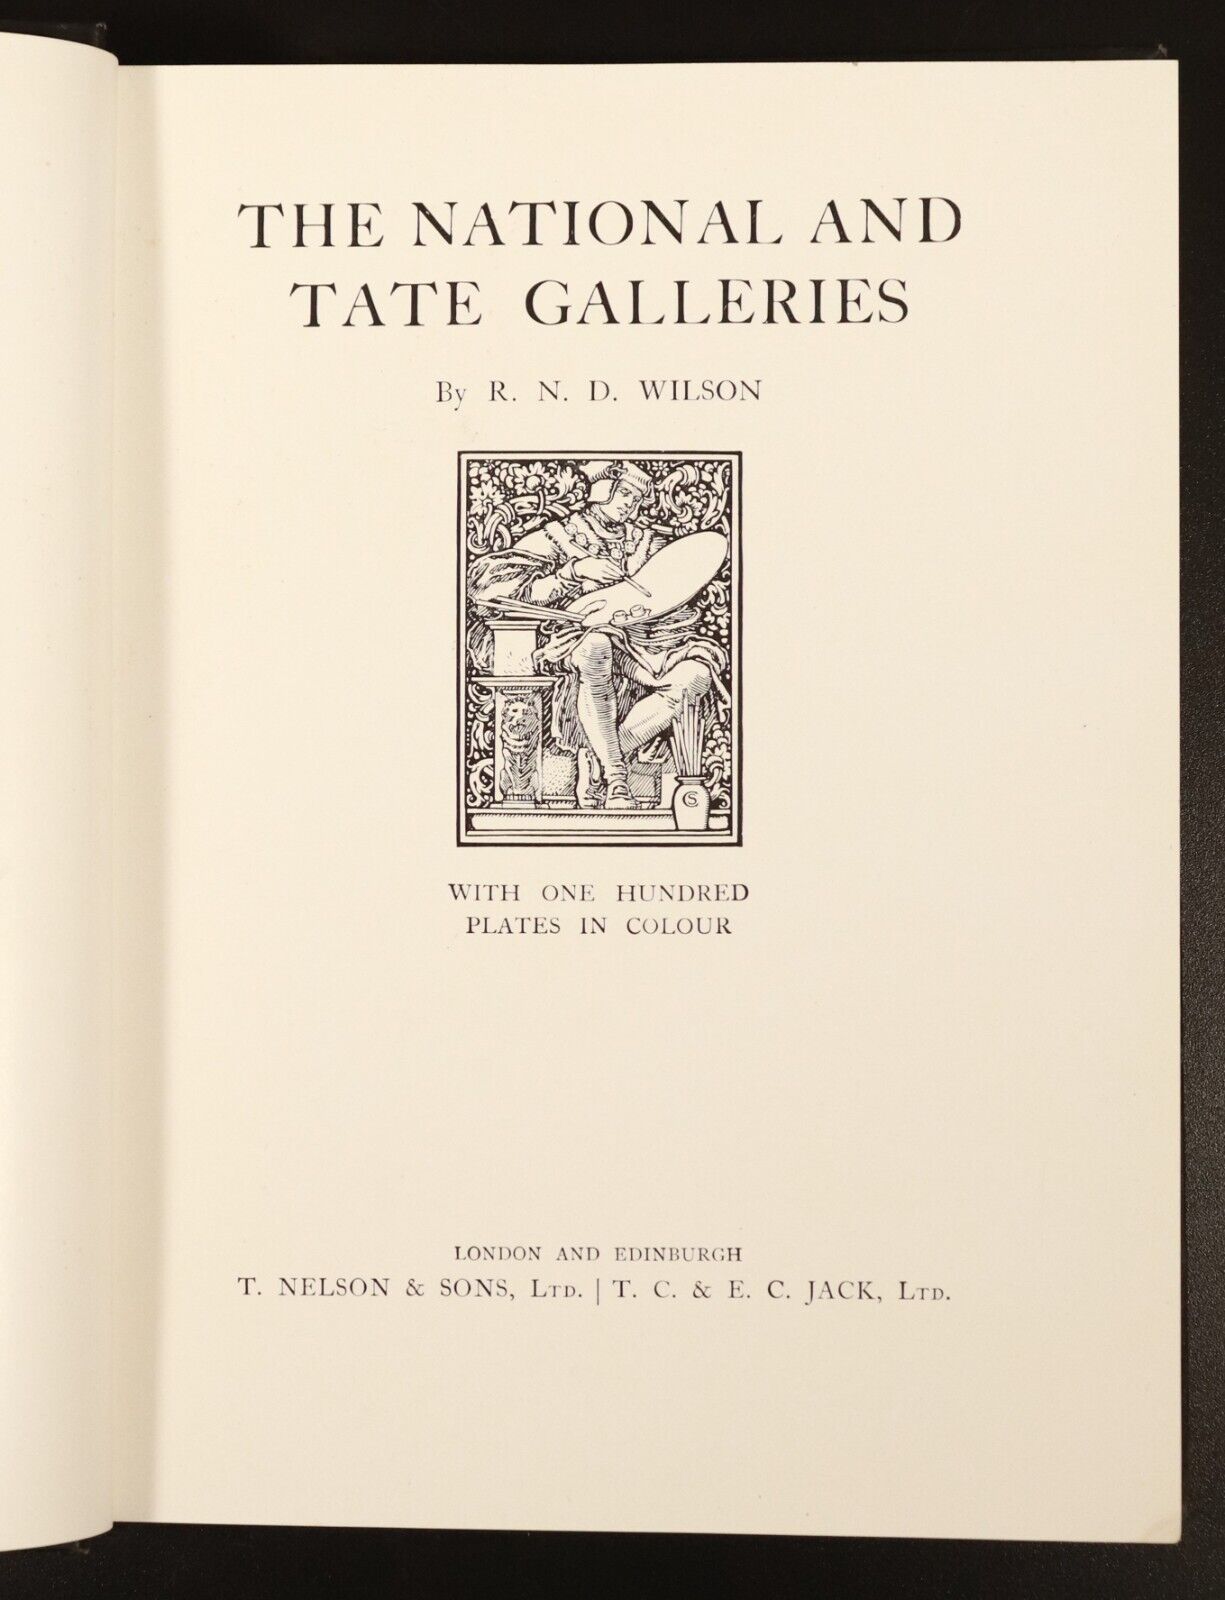 1934 The National & Tate Galleries by R.N.D. Wilson Antique British Art Book - 0